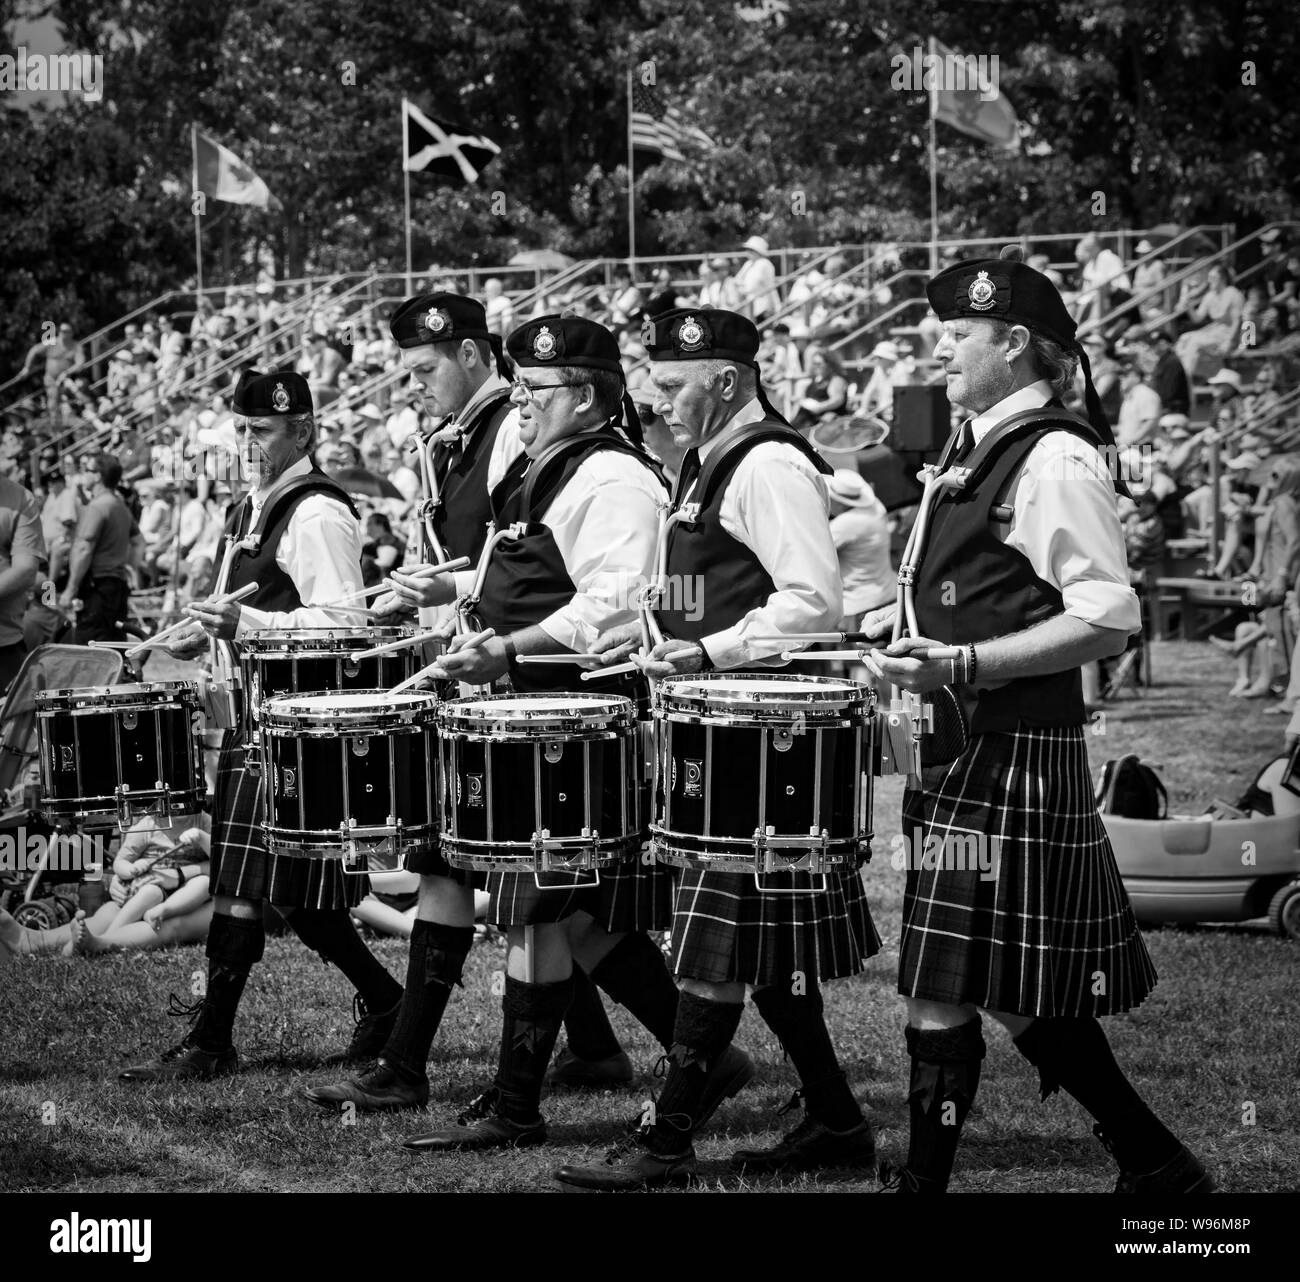 Fergus, Ontario, Canada - 08 11 2018: Drummers of the Durham Regional Police Pipes and Drums band participating in the Pipe Band contest held by Piper Stock Photo